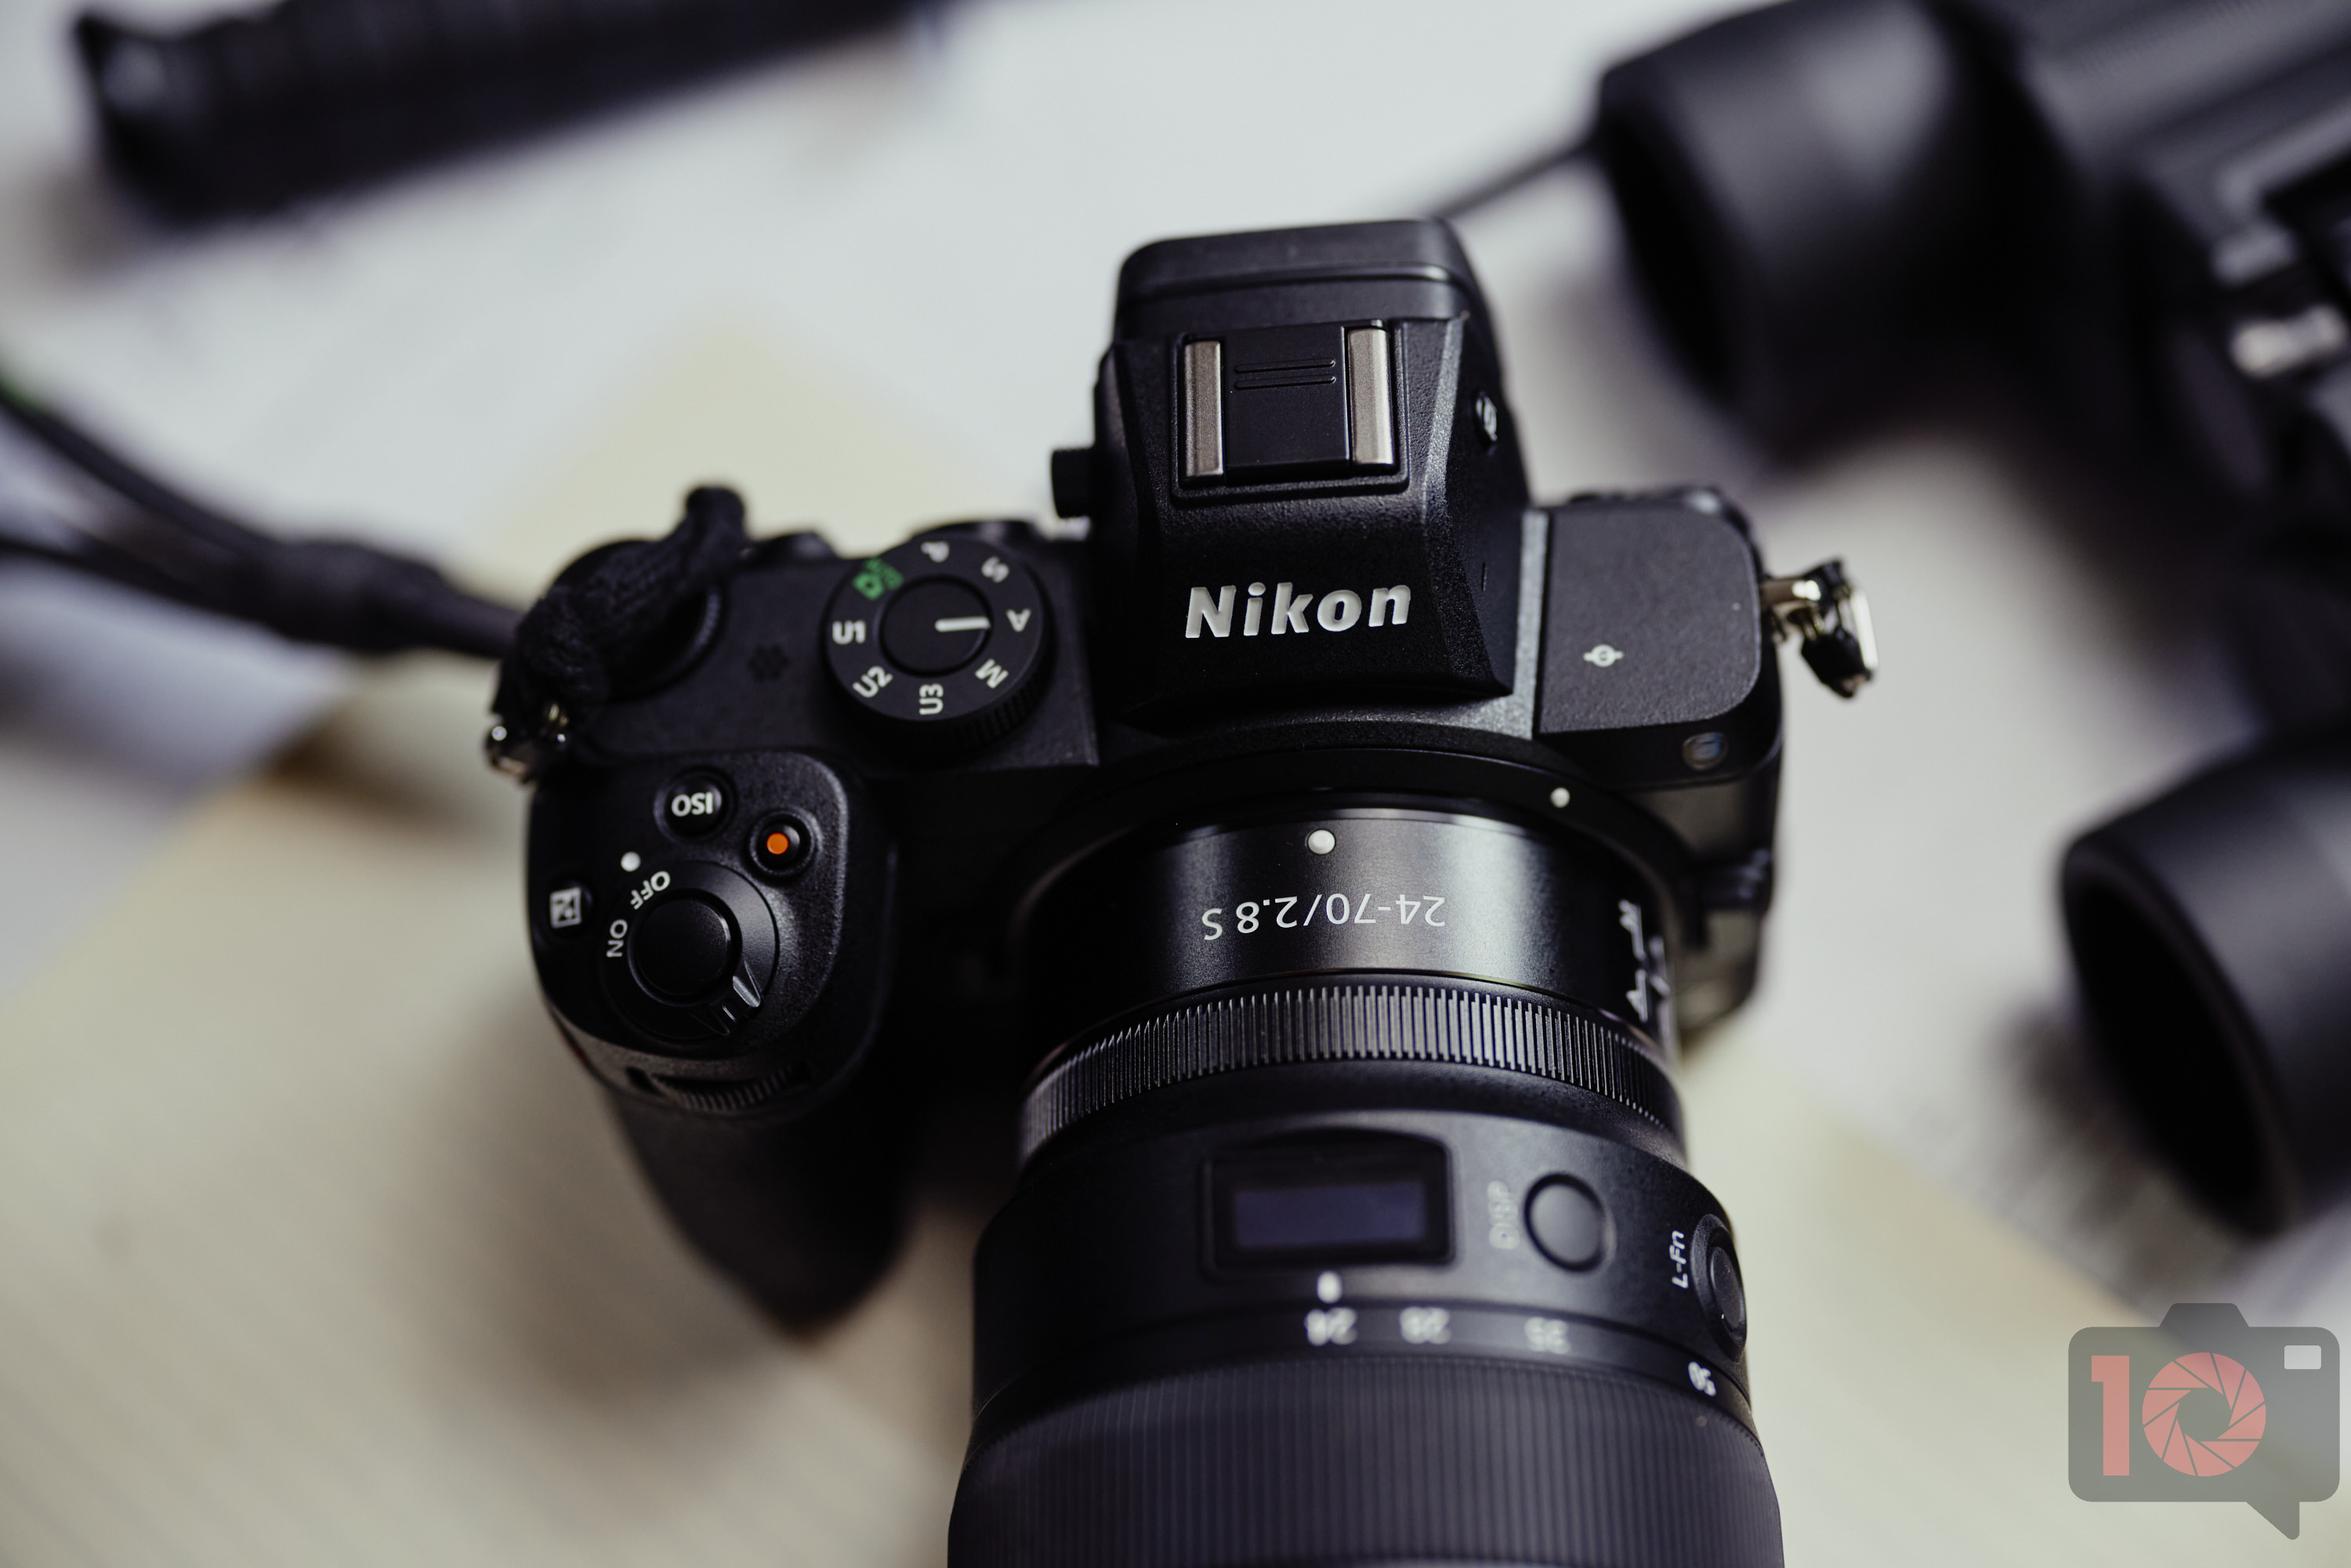 Pair the Nikon Z5 with This Lens for Great Images - The Phoblographer